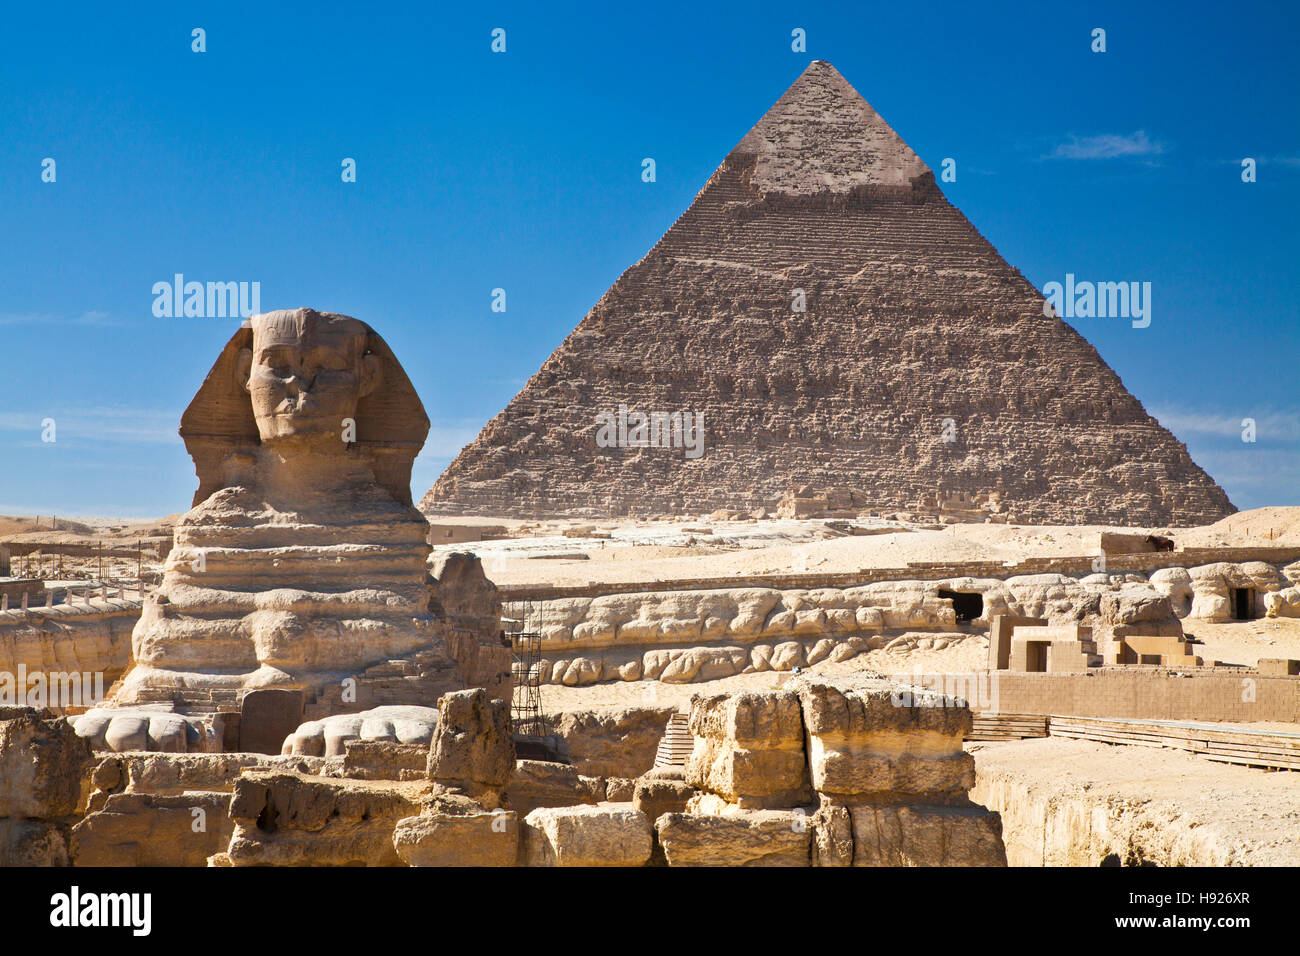 The Pyramid of Khafre or Chephren and the Sphinx at the necropolis on the Giza plateau near Cairo in Egypt. Stock Photo